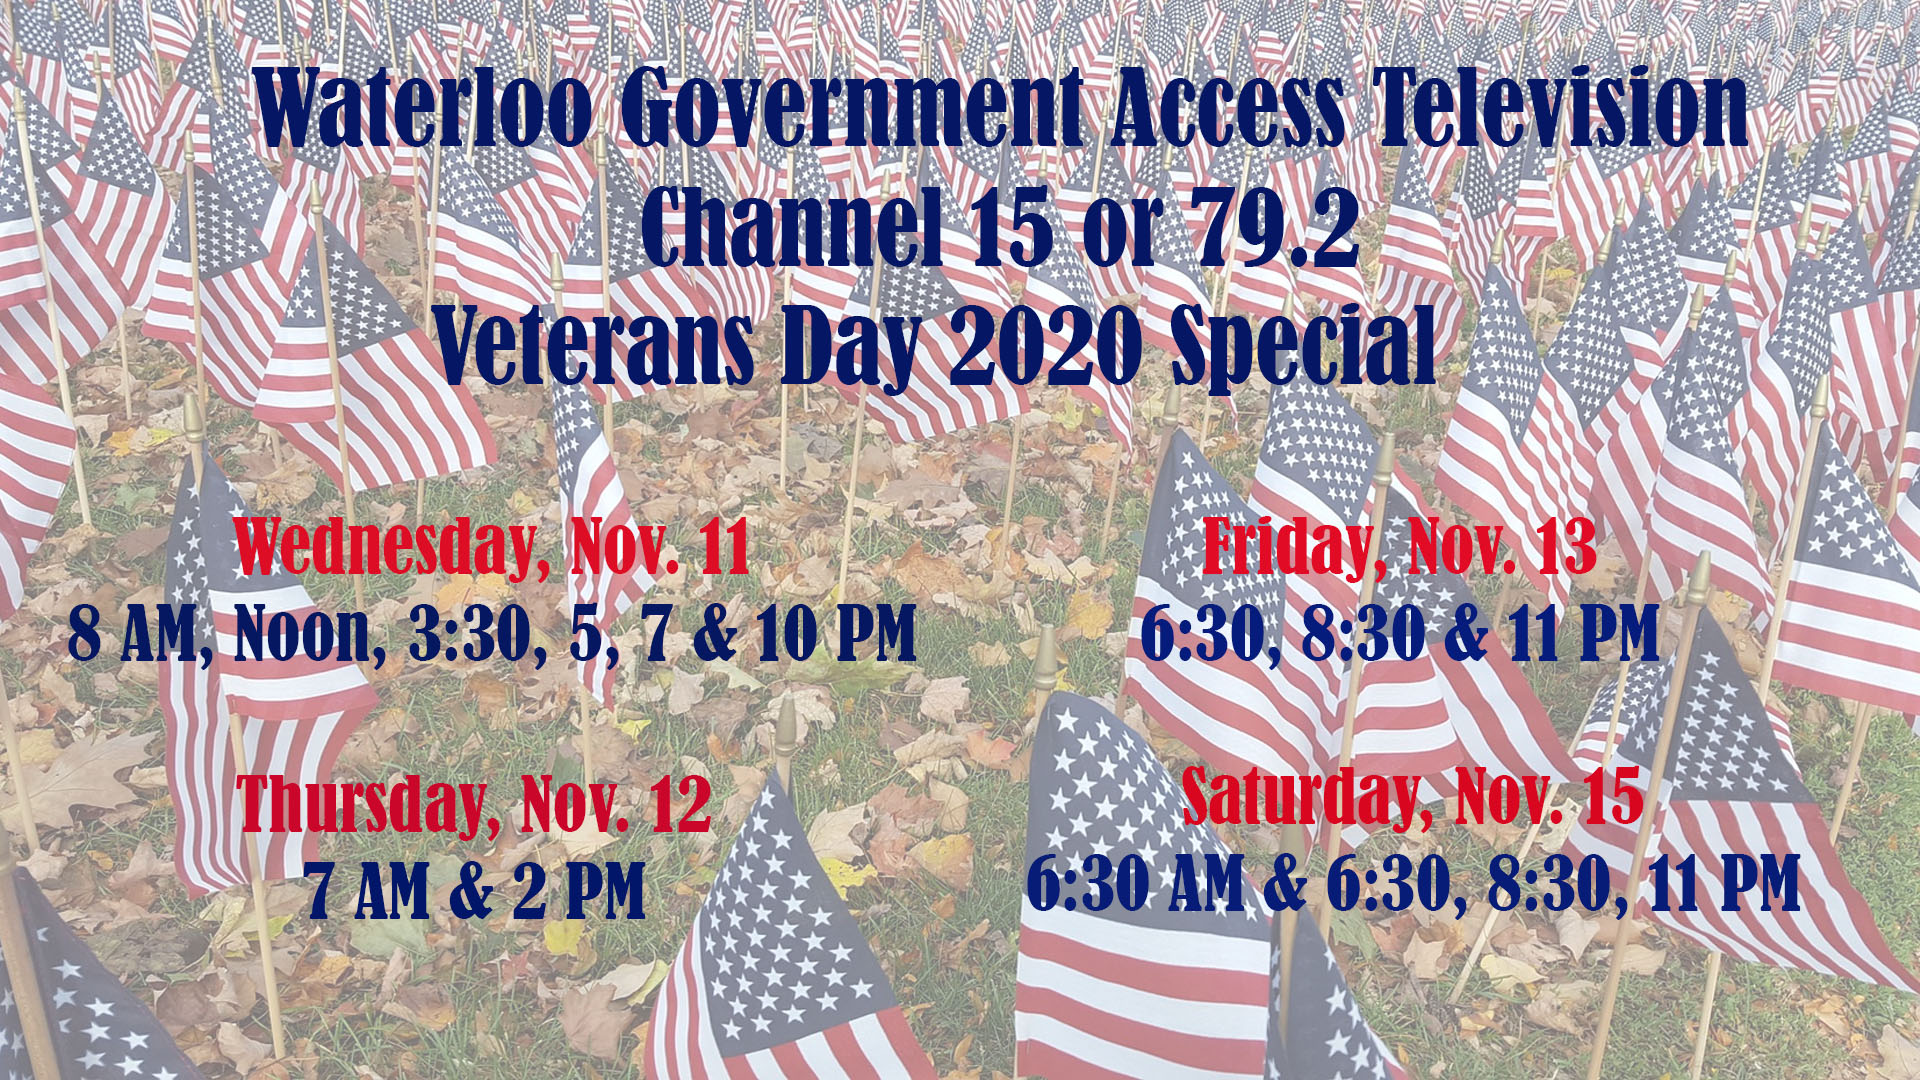 Veterans Day times